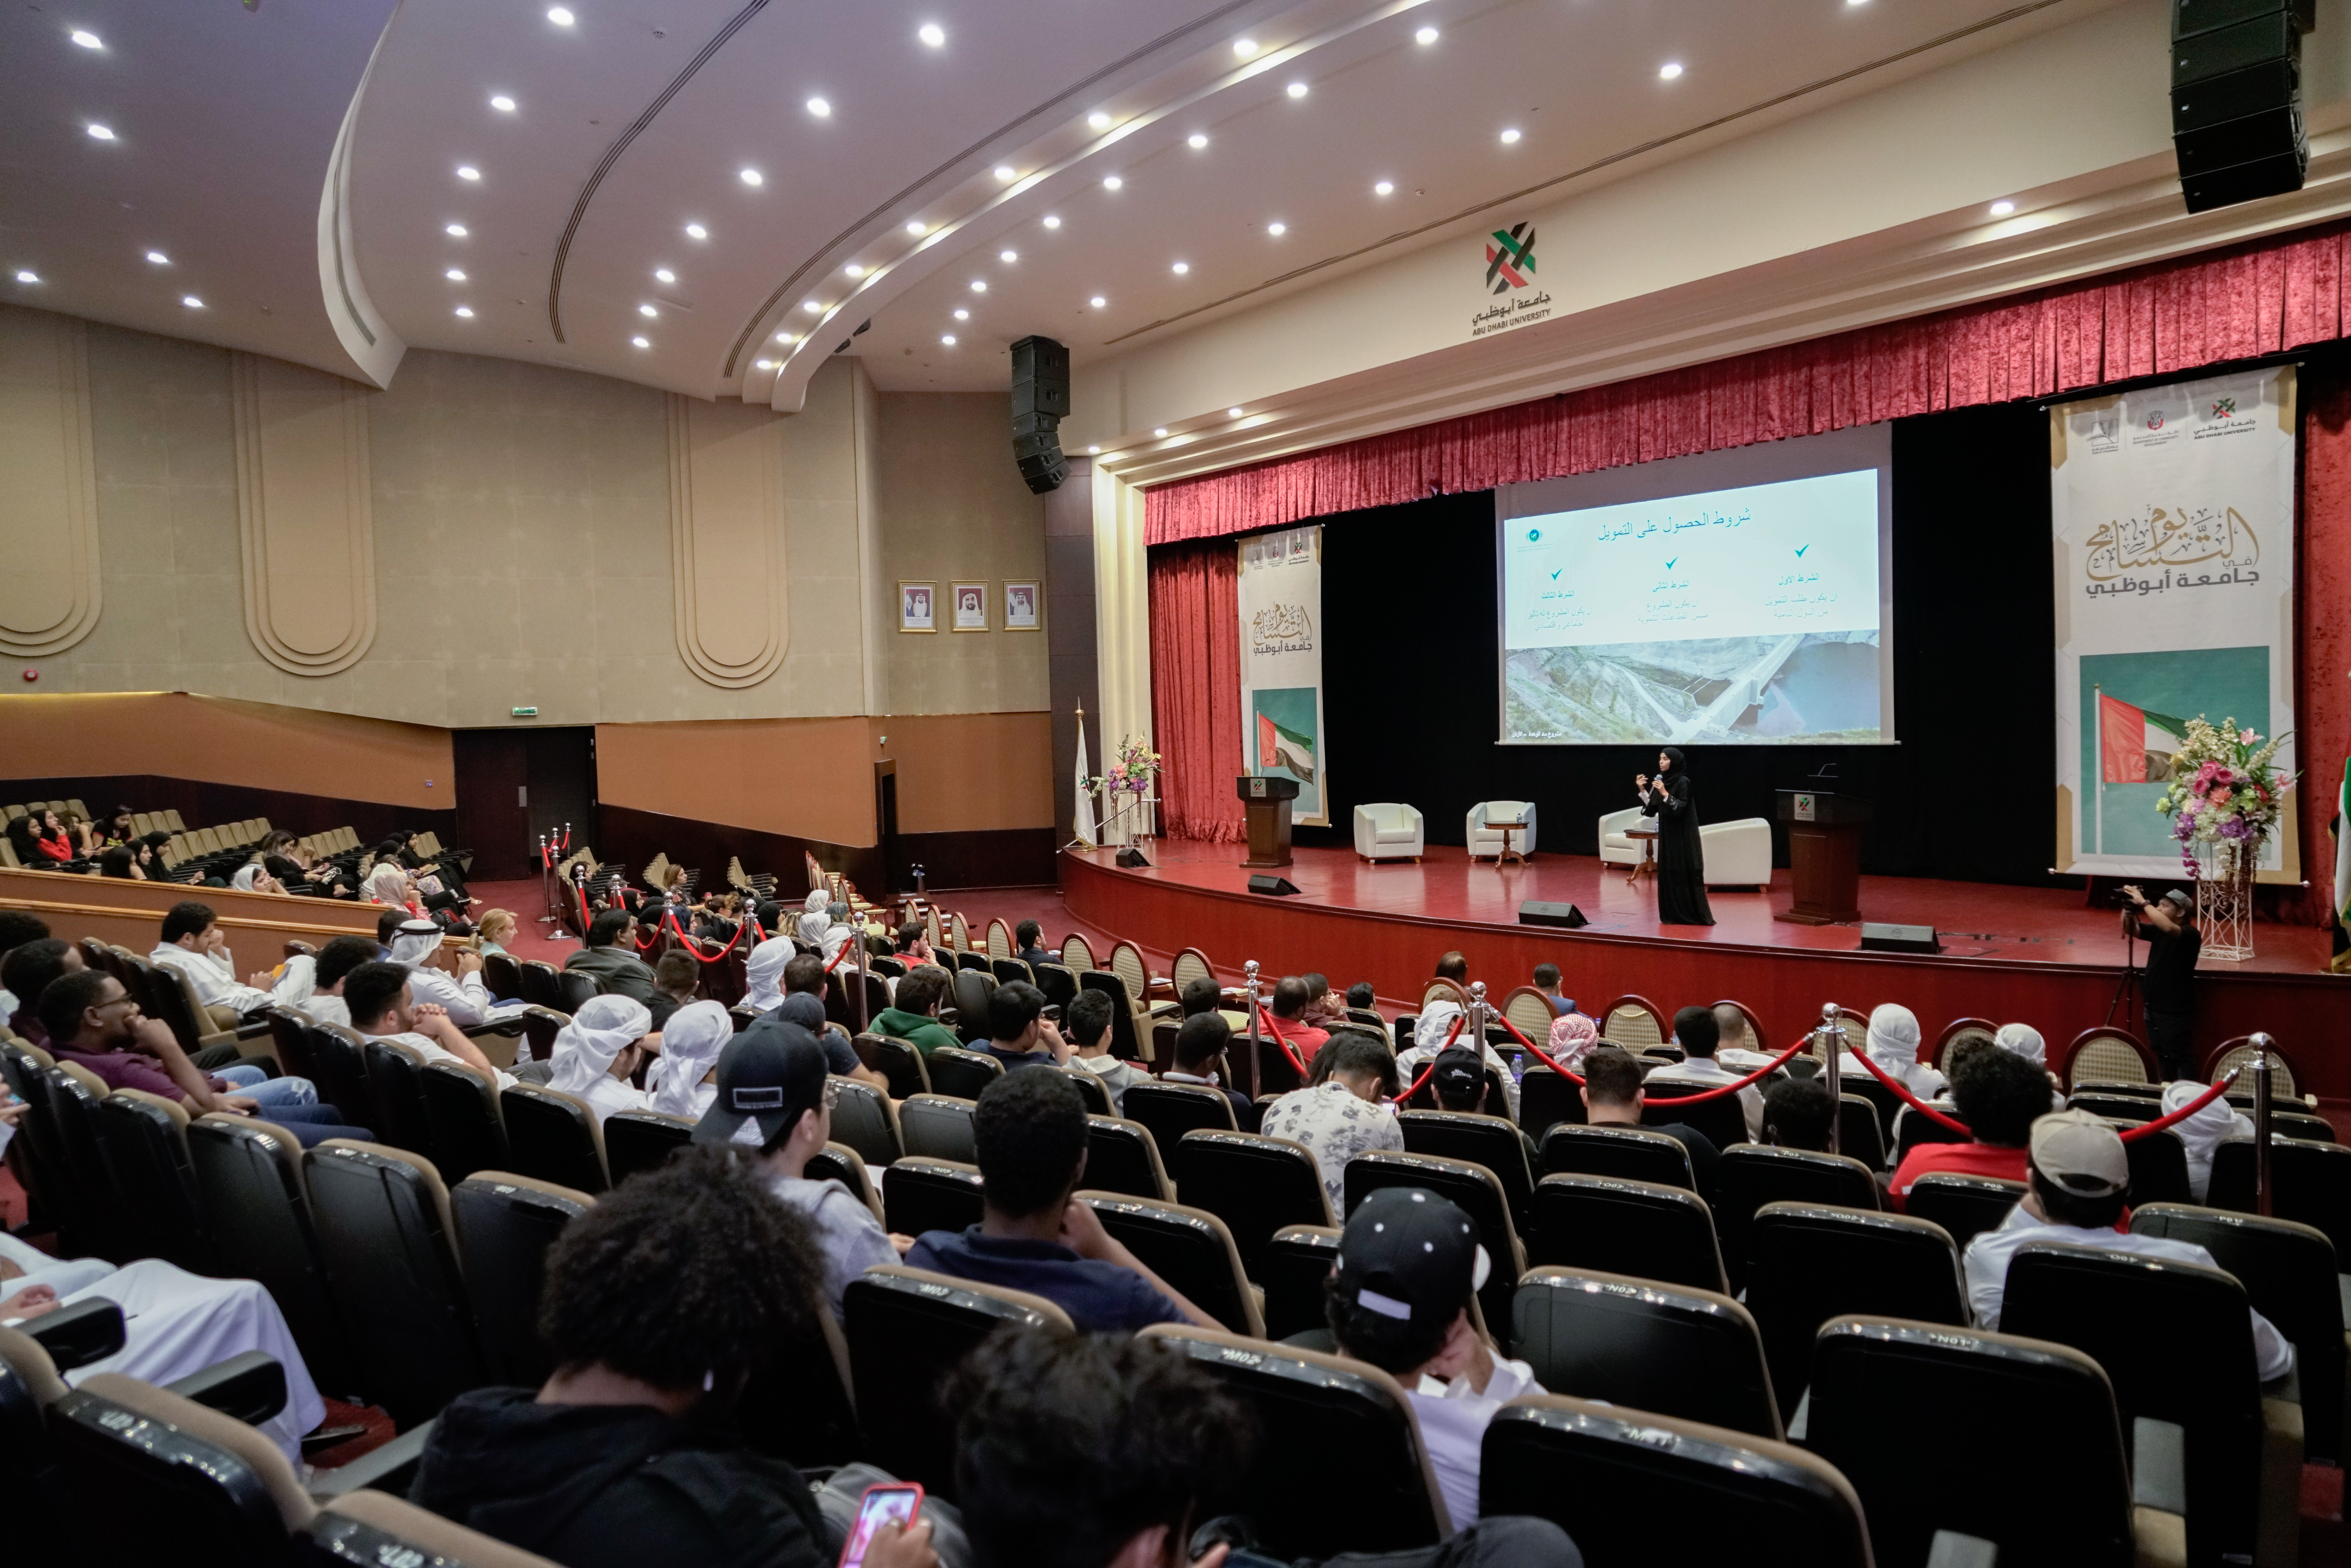 Abu Dhabi Fund For Development Highlights Importance Of Sustainable Development Funding During Lecture At Abu Dhabi University